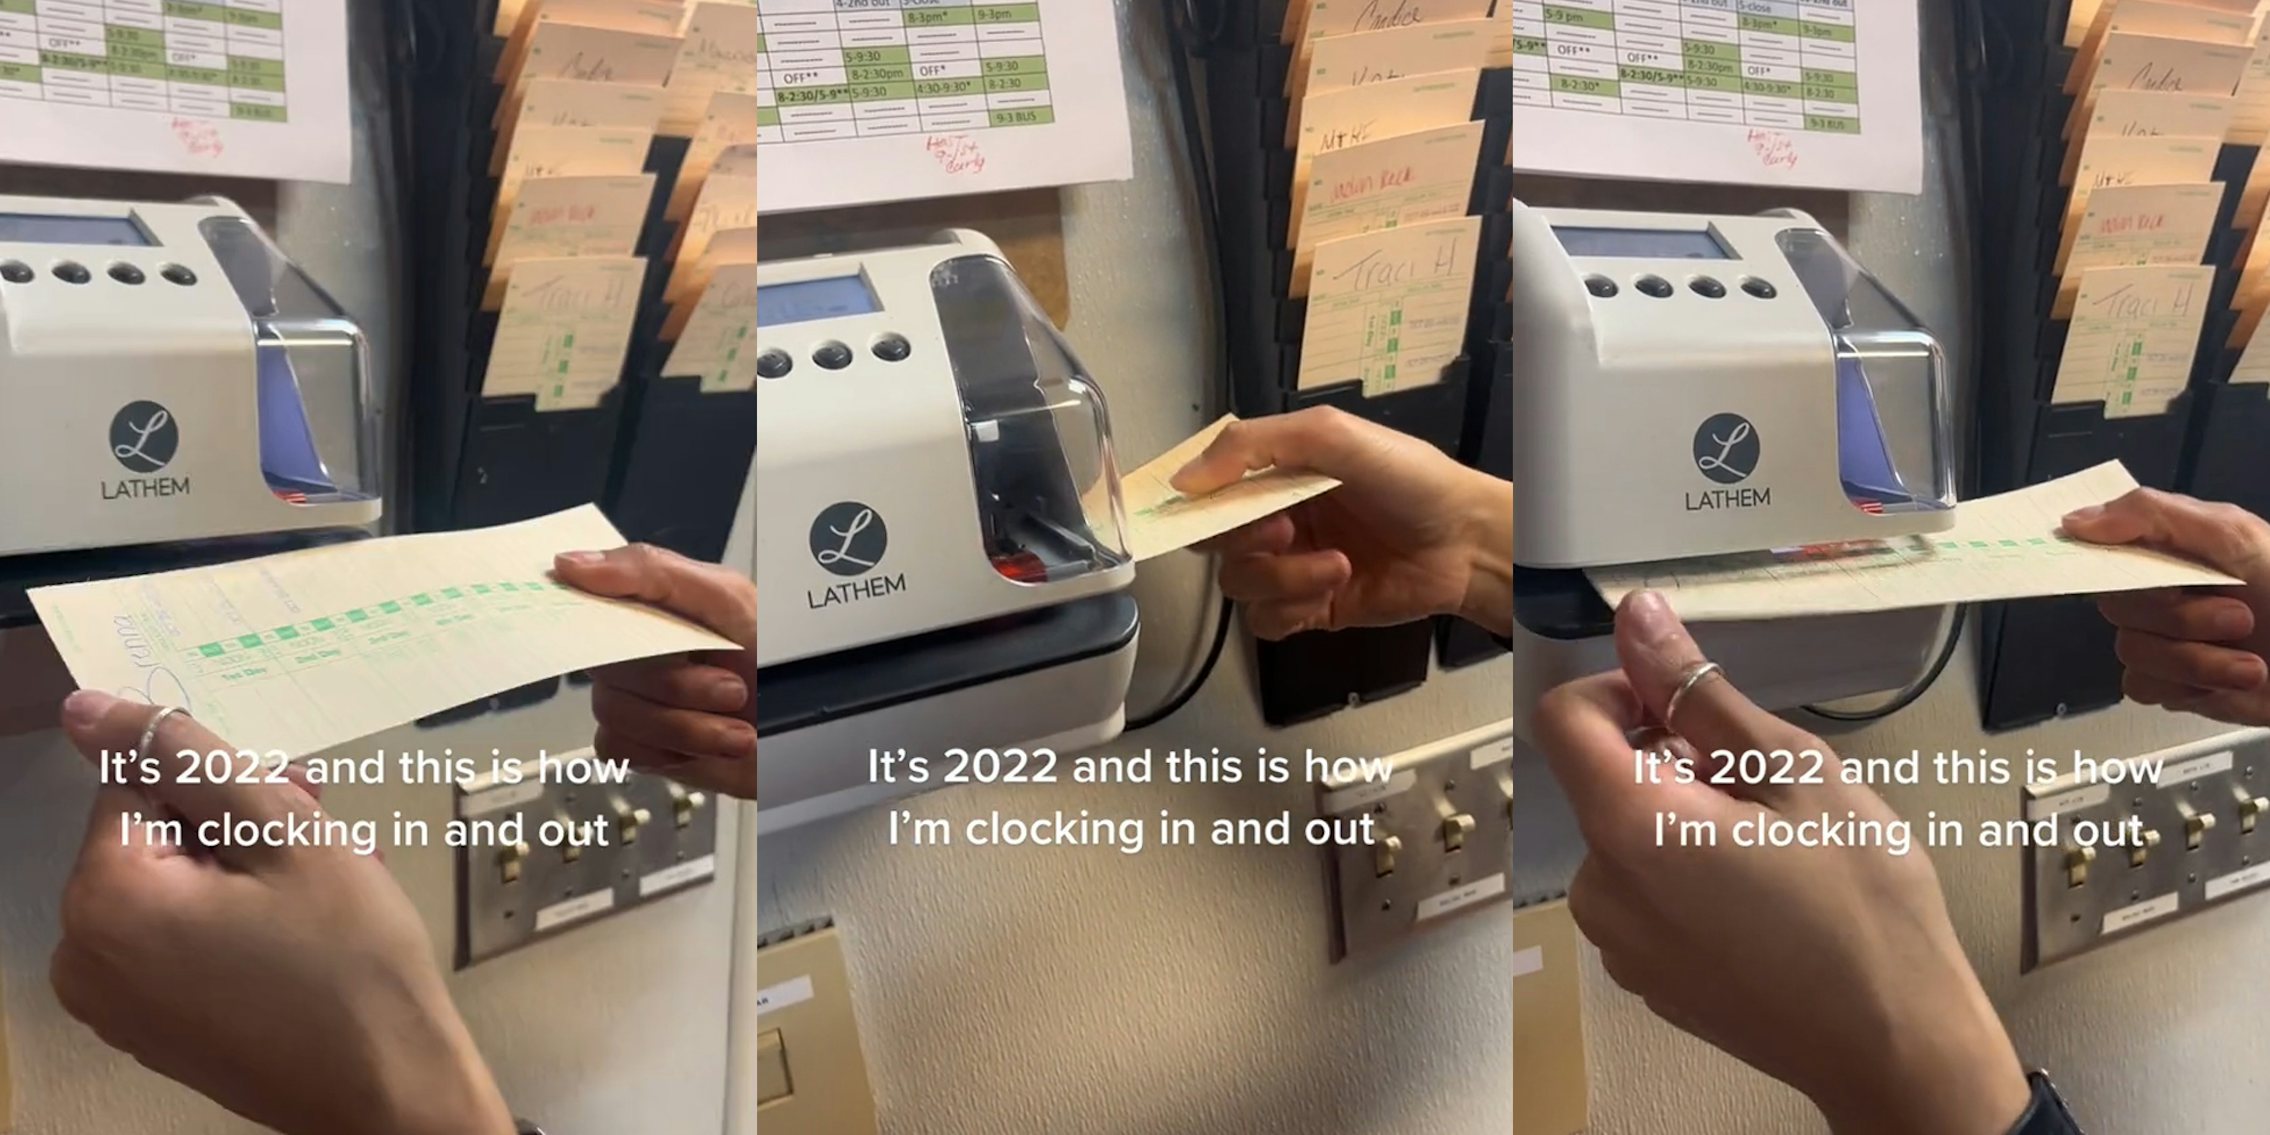 woman clocking in with card caption 'It's 2022 and this is how I'm clocking in and out' (l) woman clocking in with card caption 'It's 2022 and this is how I'm clocking in and out' (c) woman clocking in with card caption 'It's 2022 and this is how I'm clocking in and out' (r)